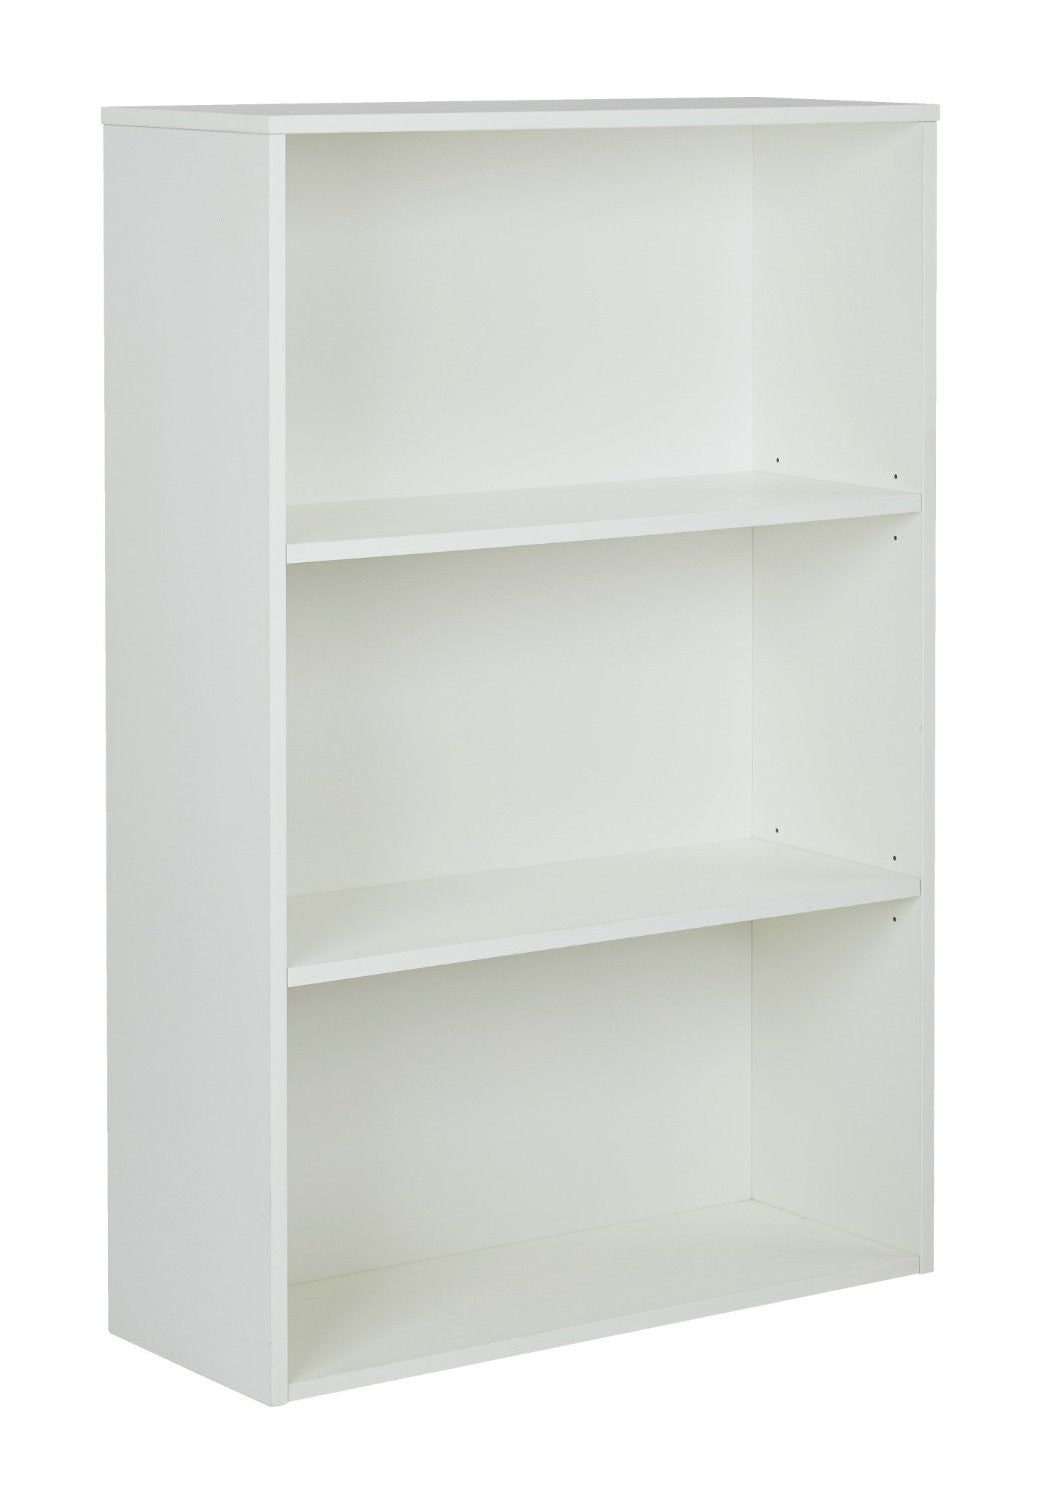 Pro-line Ii Prd3248-wh Prado 48" 3-shelf Bookcase With 3/4" Shelves And 2 Adjustable Shelves In White.